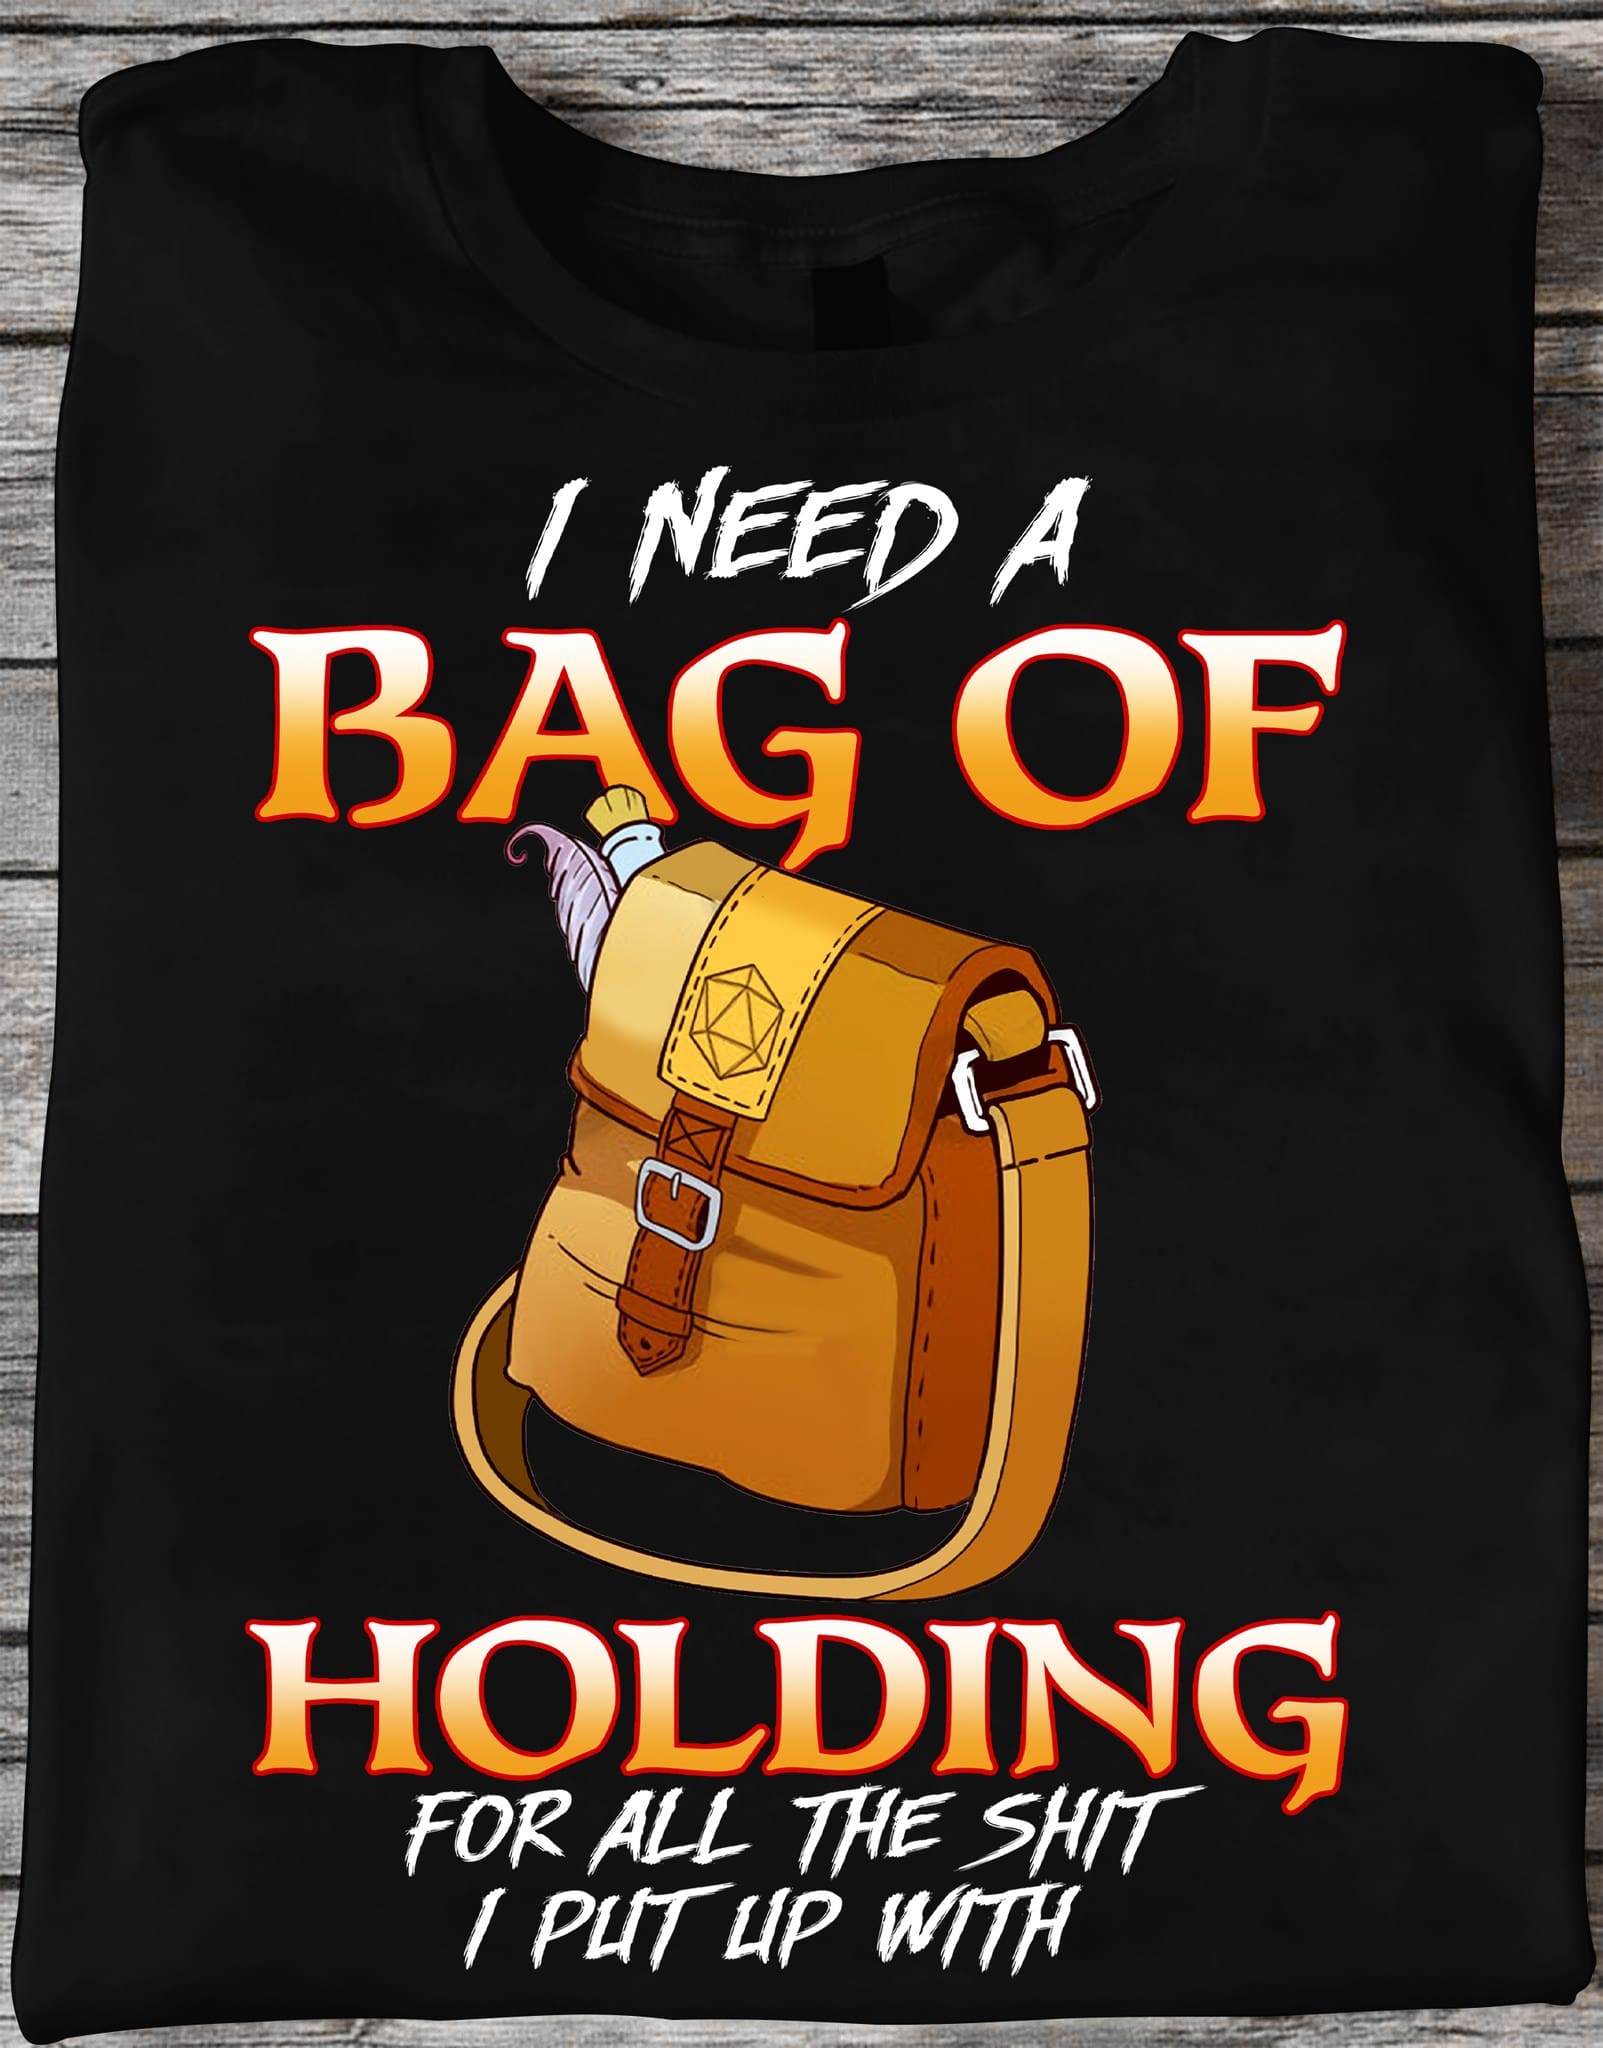 I need a bag of holding for all the shit I put up with - Magic items, DnD beyond, Dungeons and Dragons